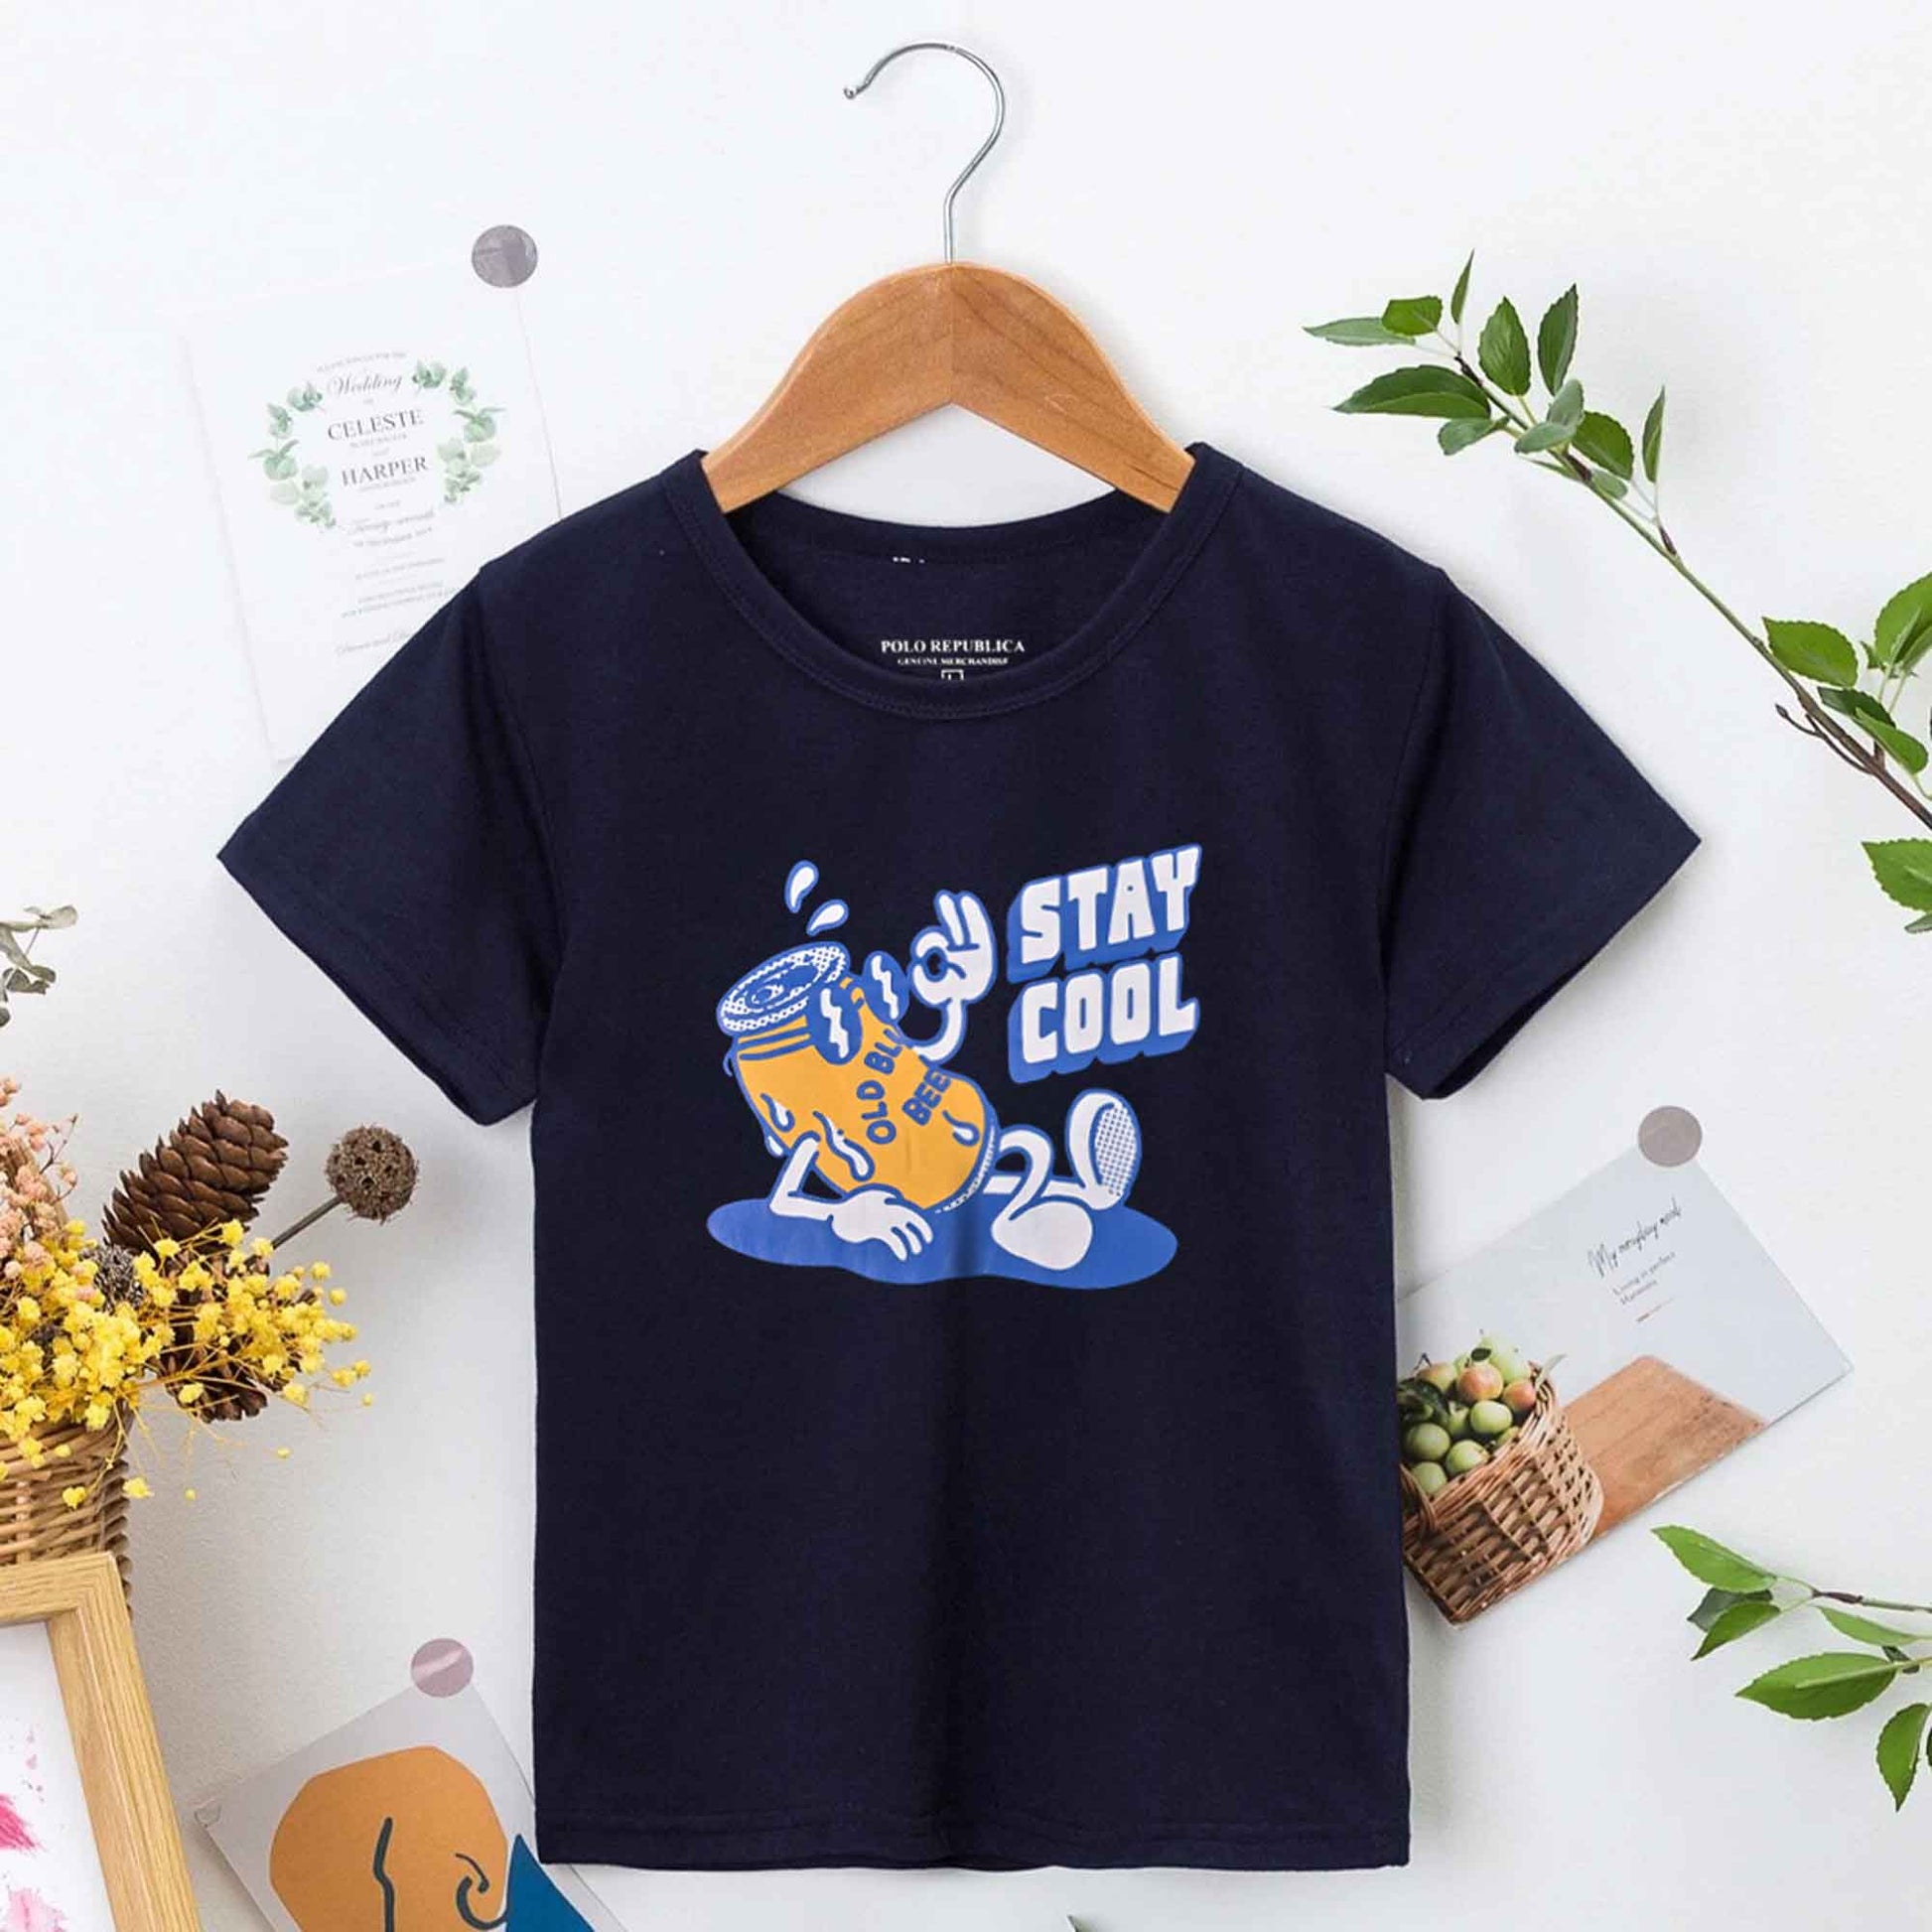 Polo Republica Boy's Stay Cool Printed Tee Shirt Boy's Tee Shirt Polo Republica Navy 1-2 Years 